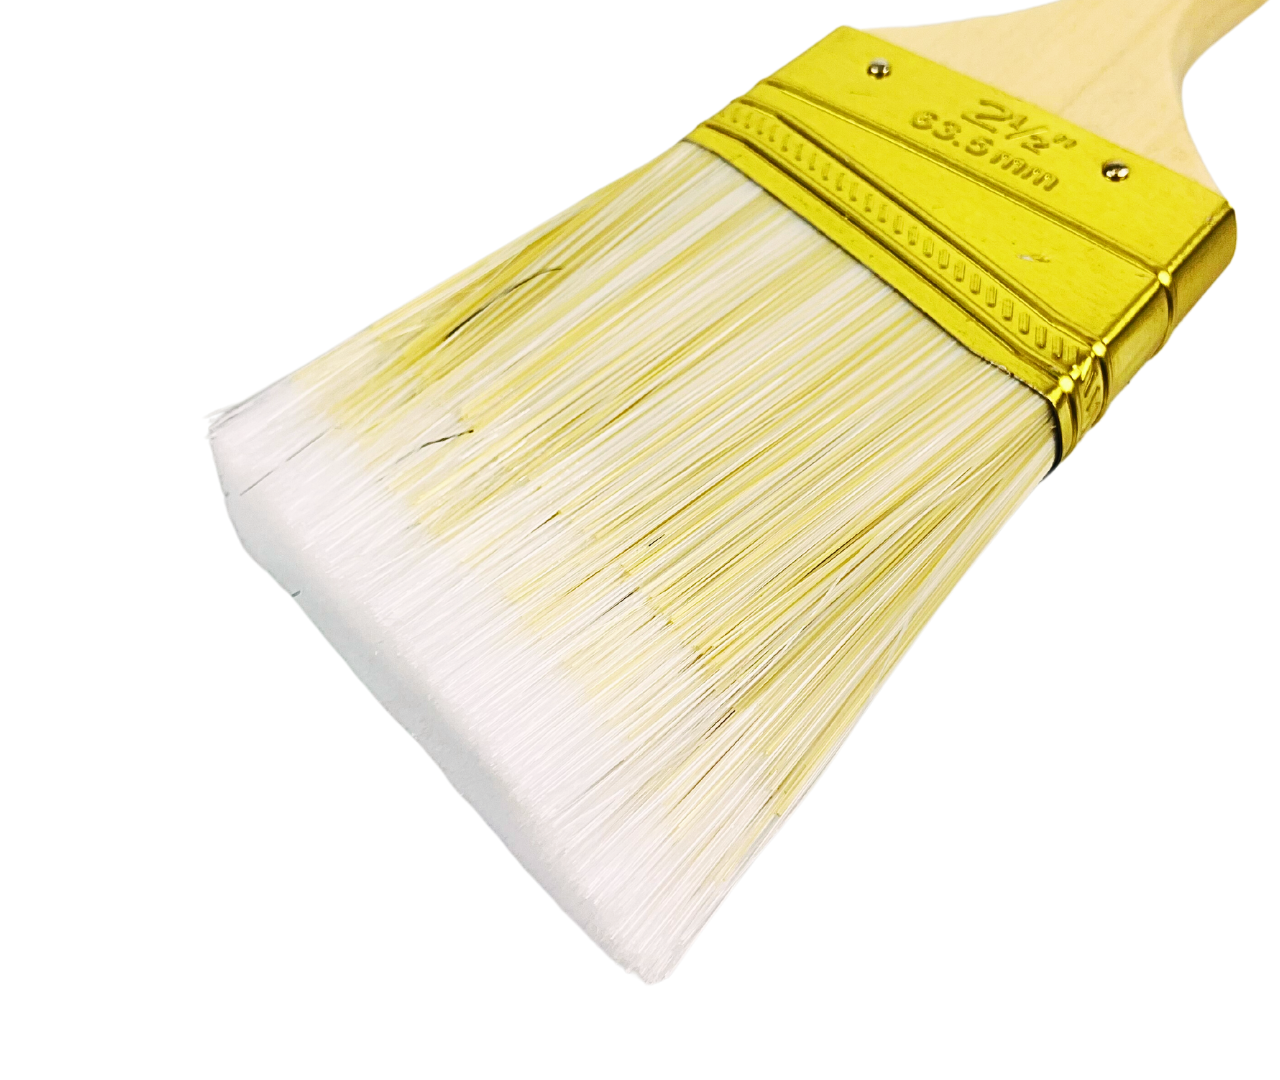 2.5" Wide Bristle Brush, for House Painting, Varnish or Lacquer (Pack of: 2) - TZ636-250-Z02